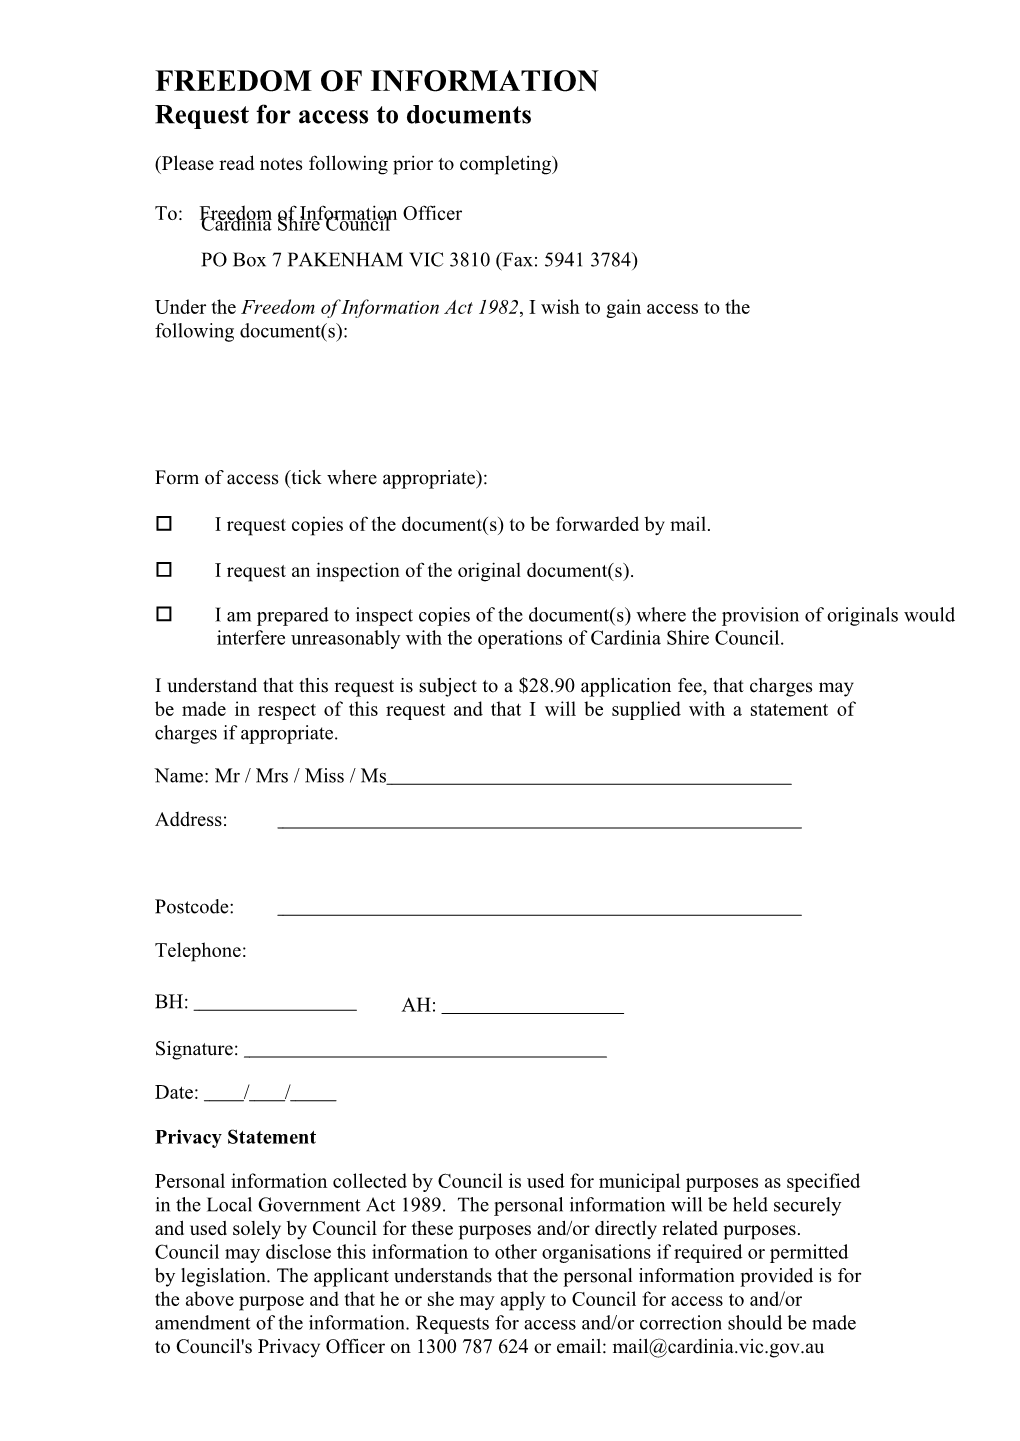 INT1024266 Freedom of Information FOI Form - Word Format Document